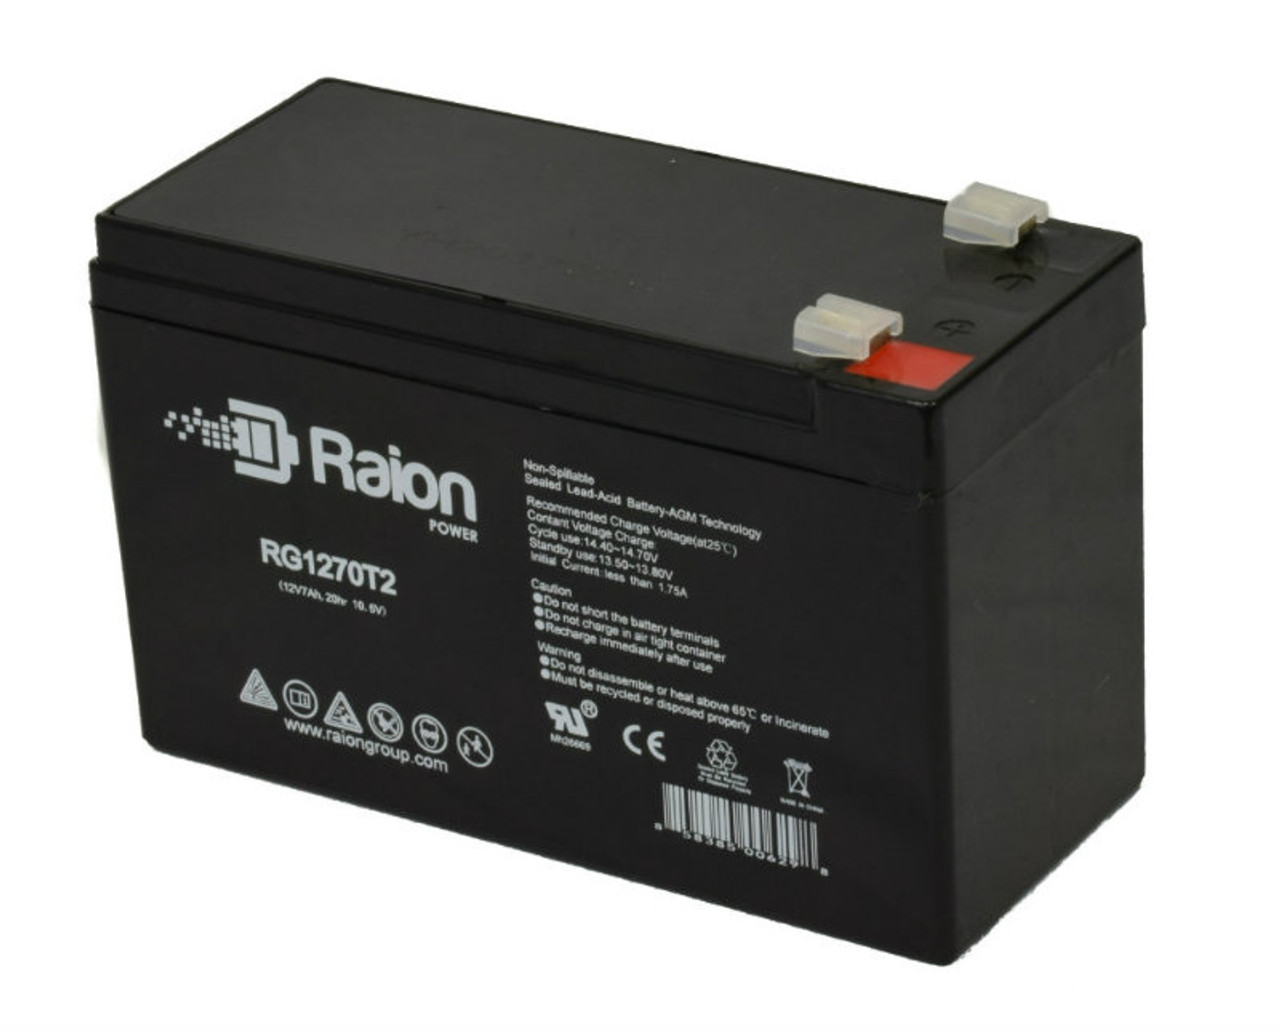 Raion Power Replacement RG1270T1 Battery for Bruno Elite Curved Stairlift CRE 2110